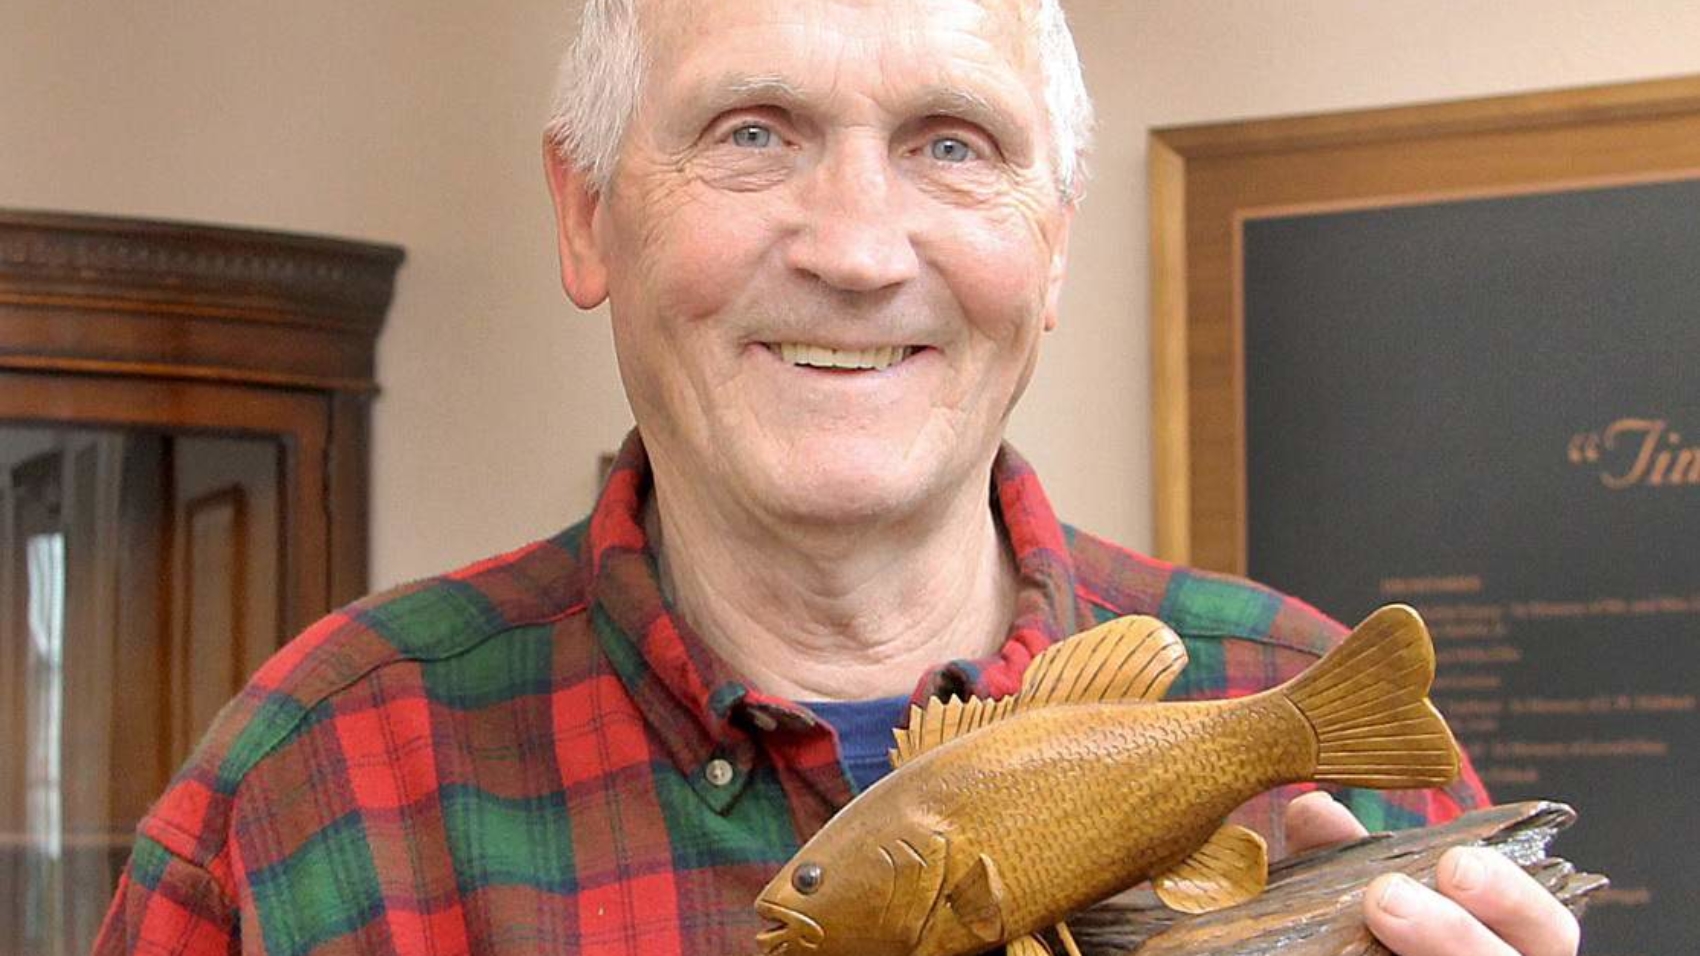 Tony Fornelli poses with a wooden fish carved by him.